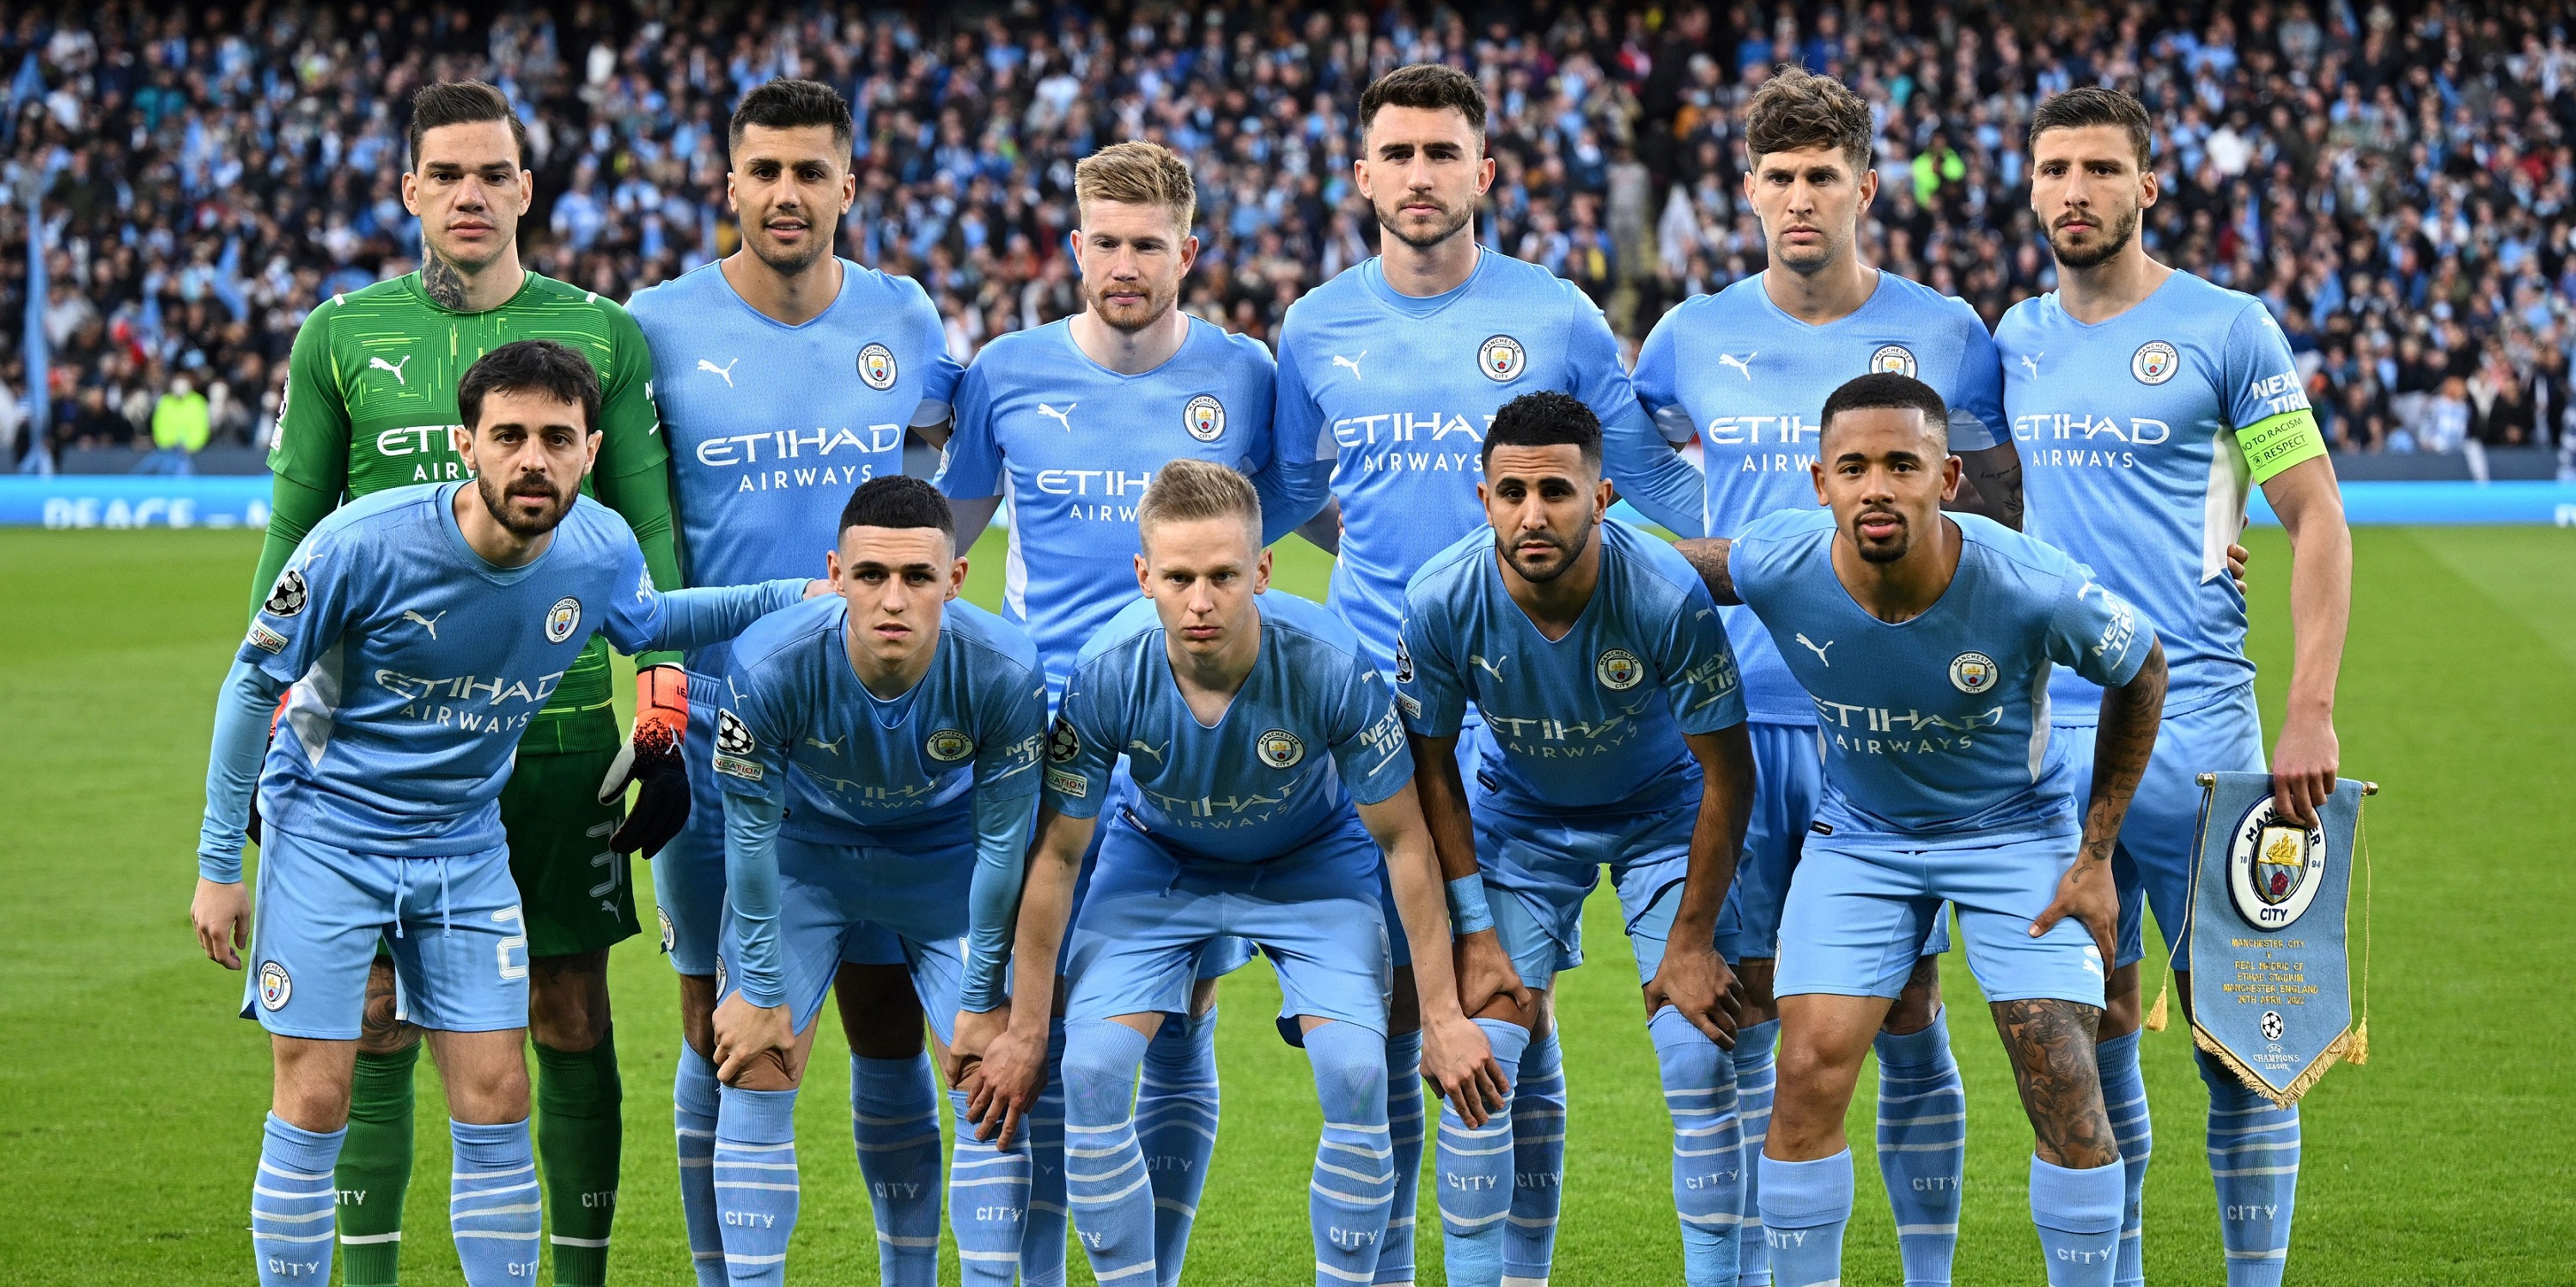 Exclusive: Ex-Red on Man City star who would ‘worry’ him if Cityzens meet Liverpool in Champions League final